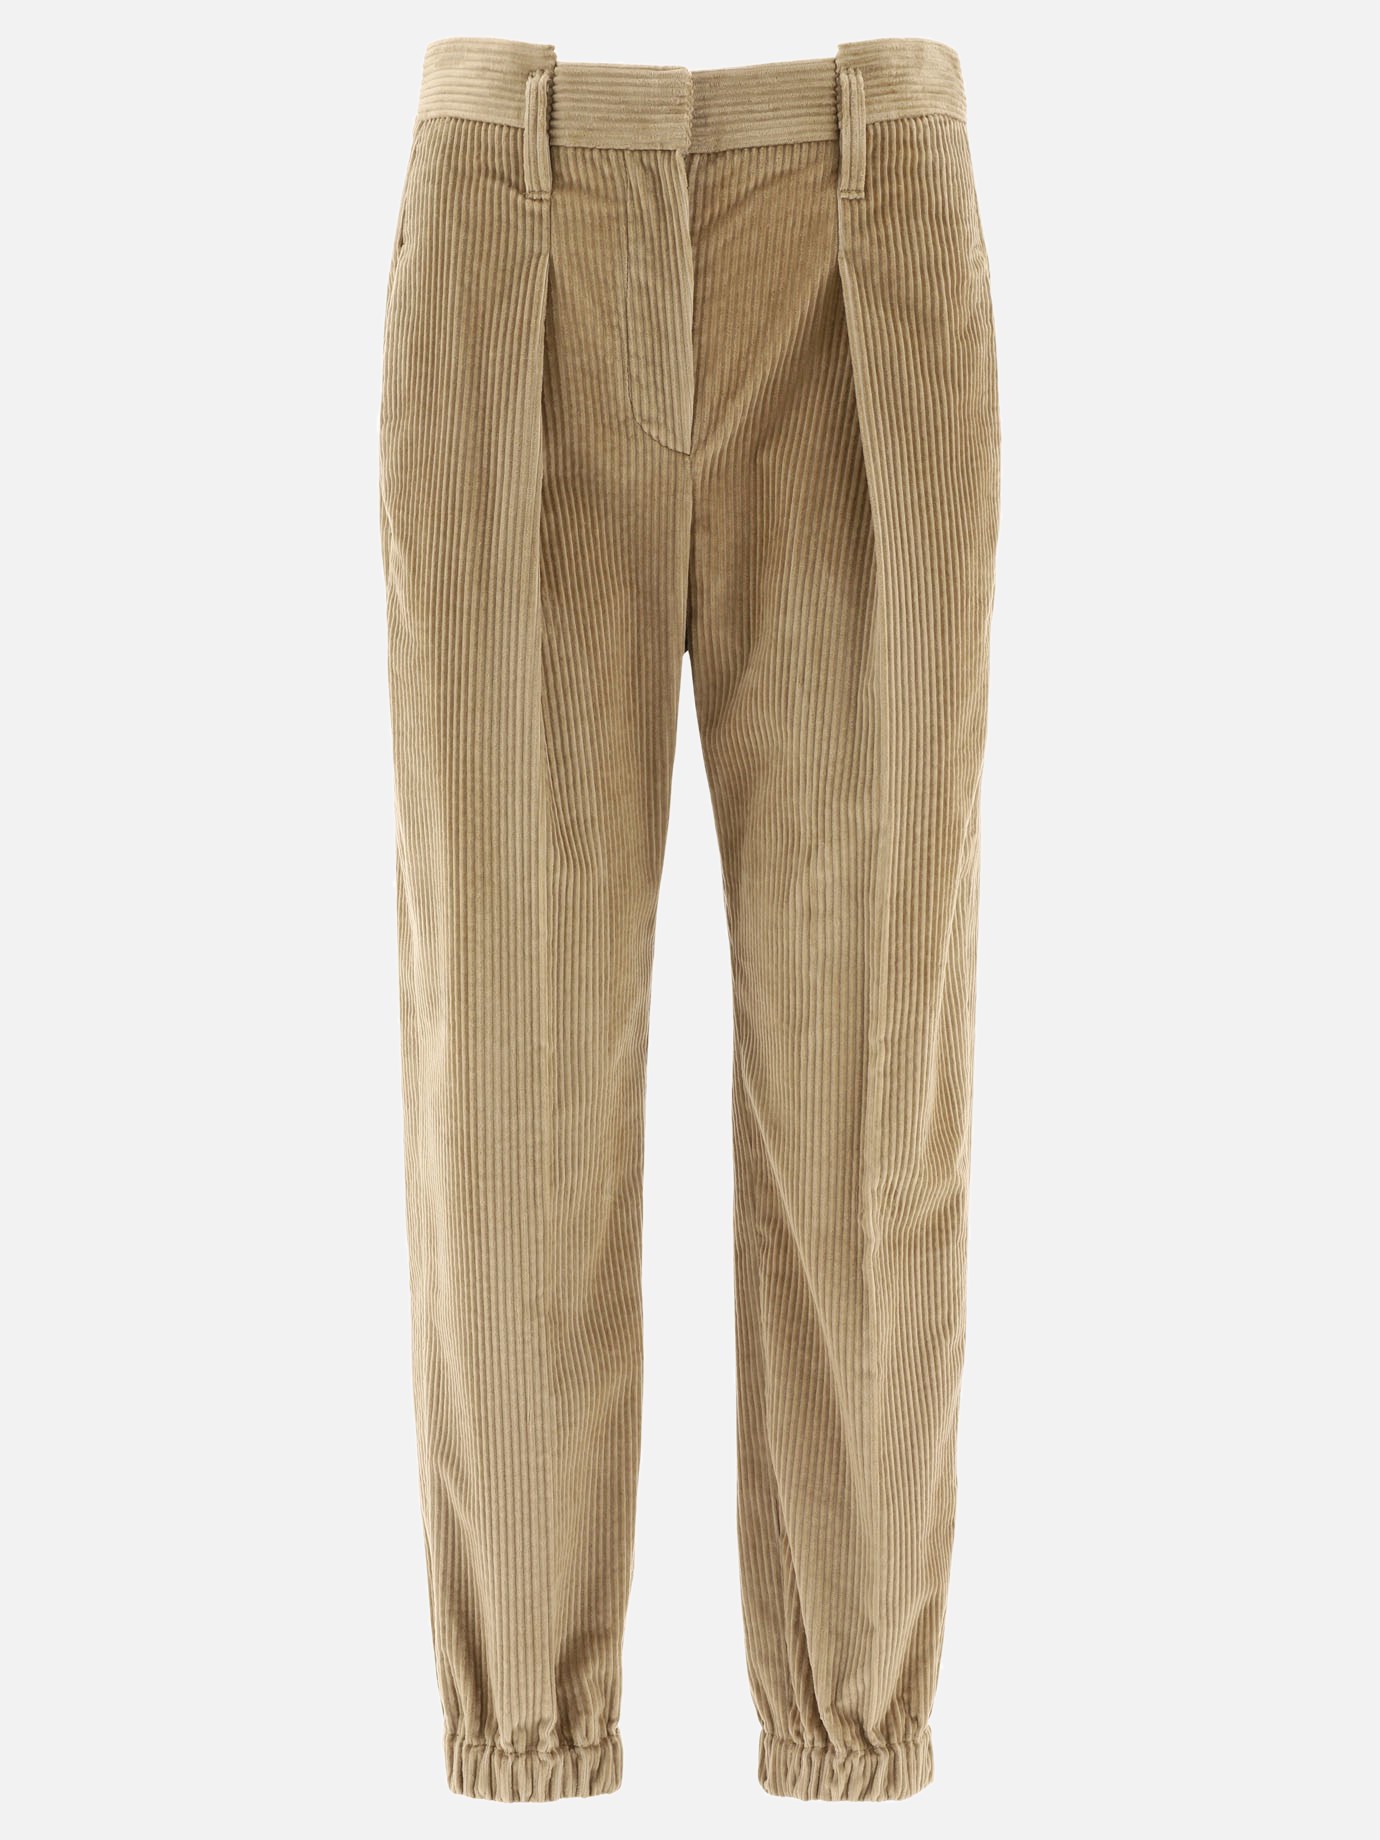 Ribbed stretch trousersby Brunello Cucinelli - 5